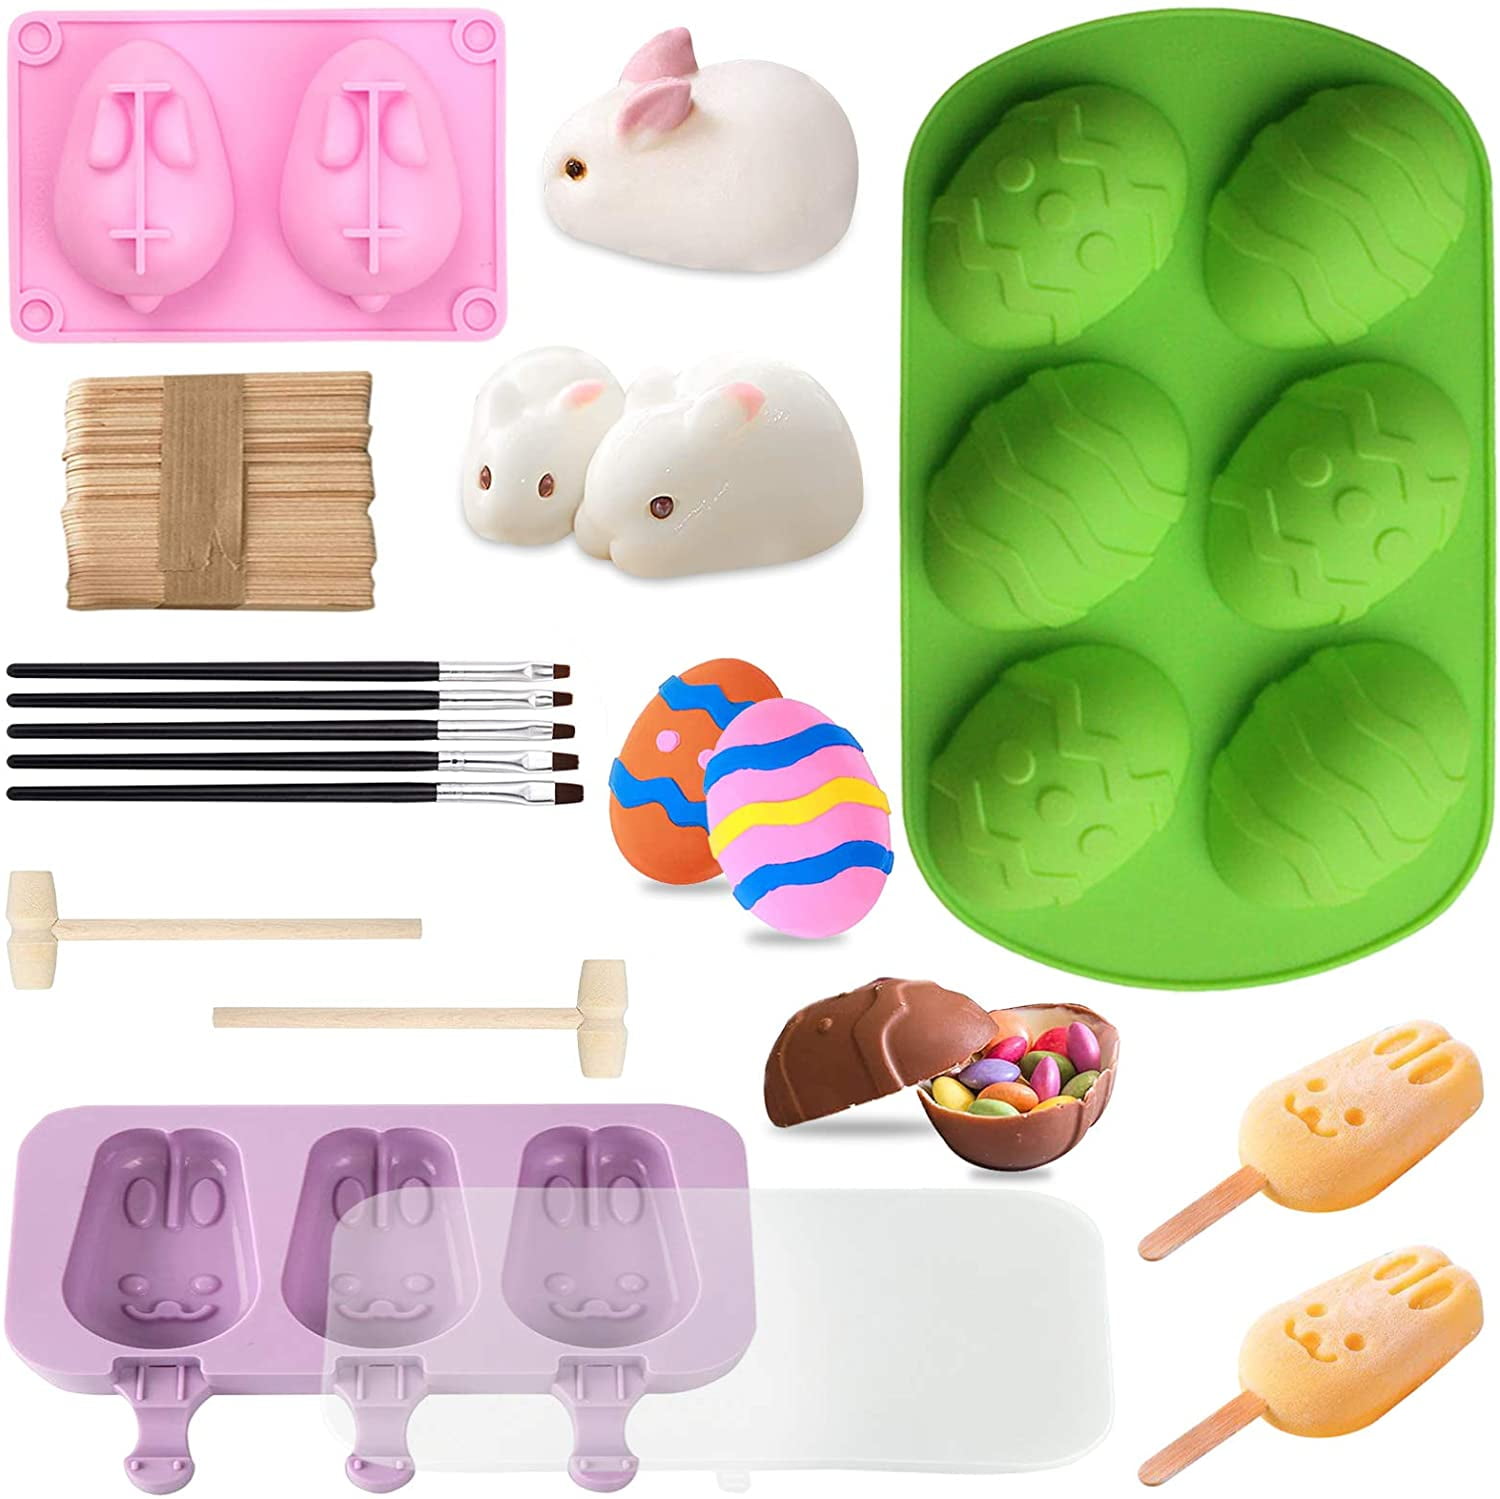 Crafts at Home Free Shipping! Make Candy Bunny in Egg Lollipop Lolly Mold 